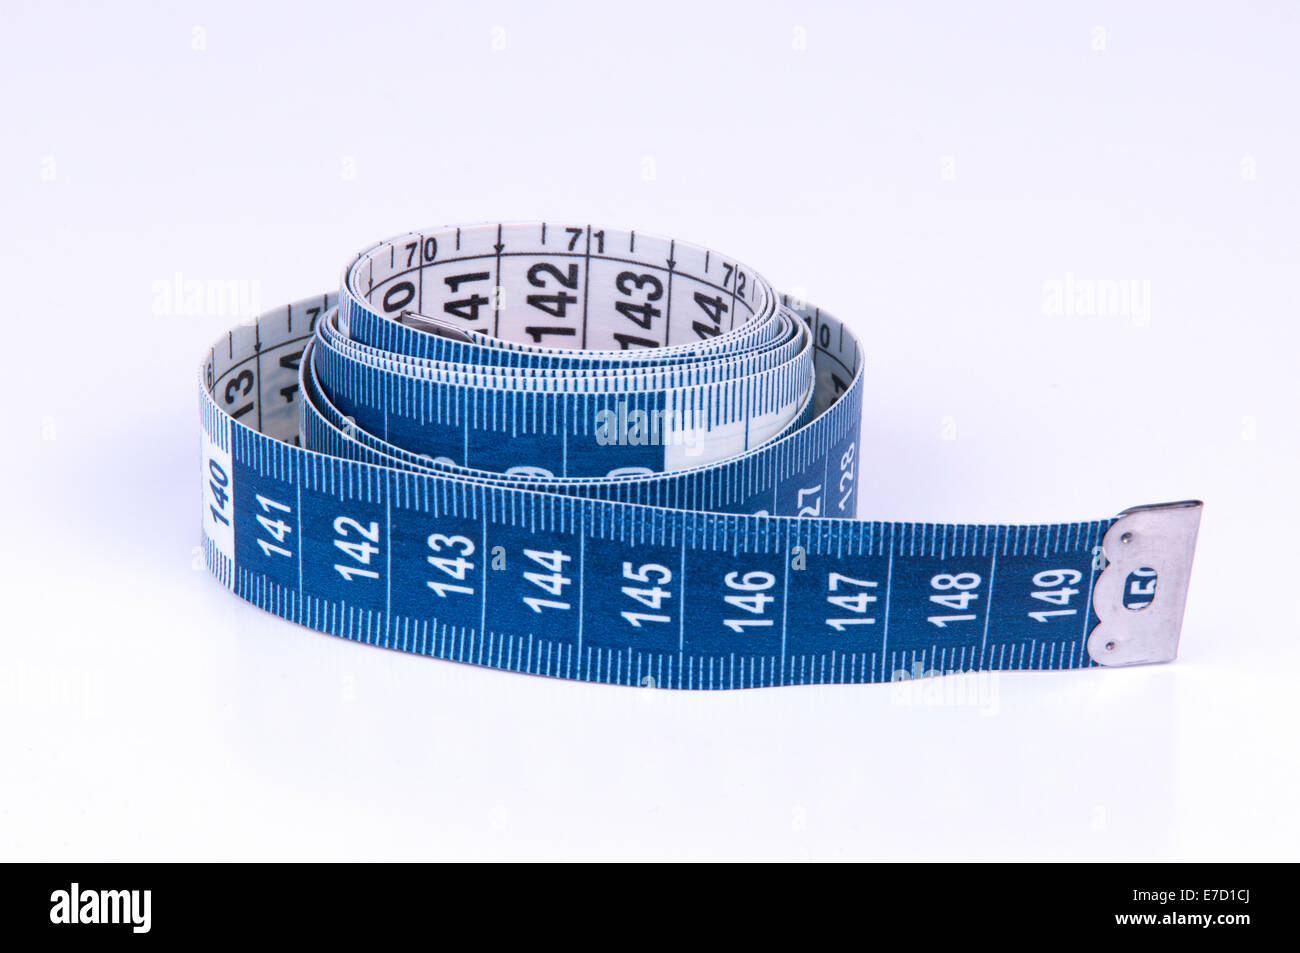 Tailors Tape Measure Over White Background Stock Photo 105252089